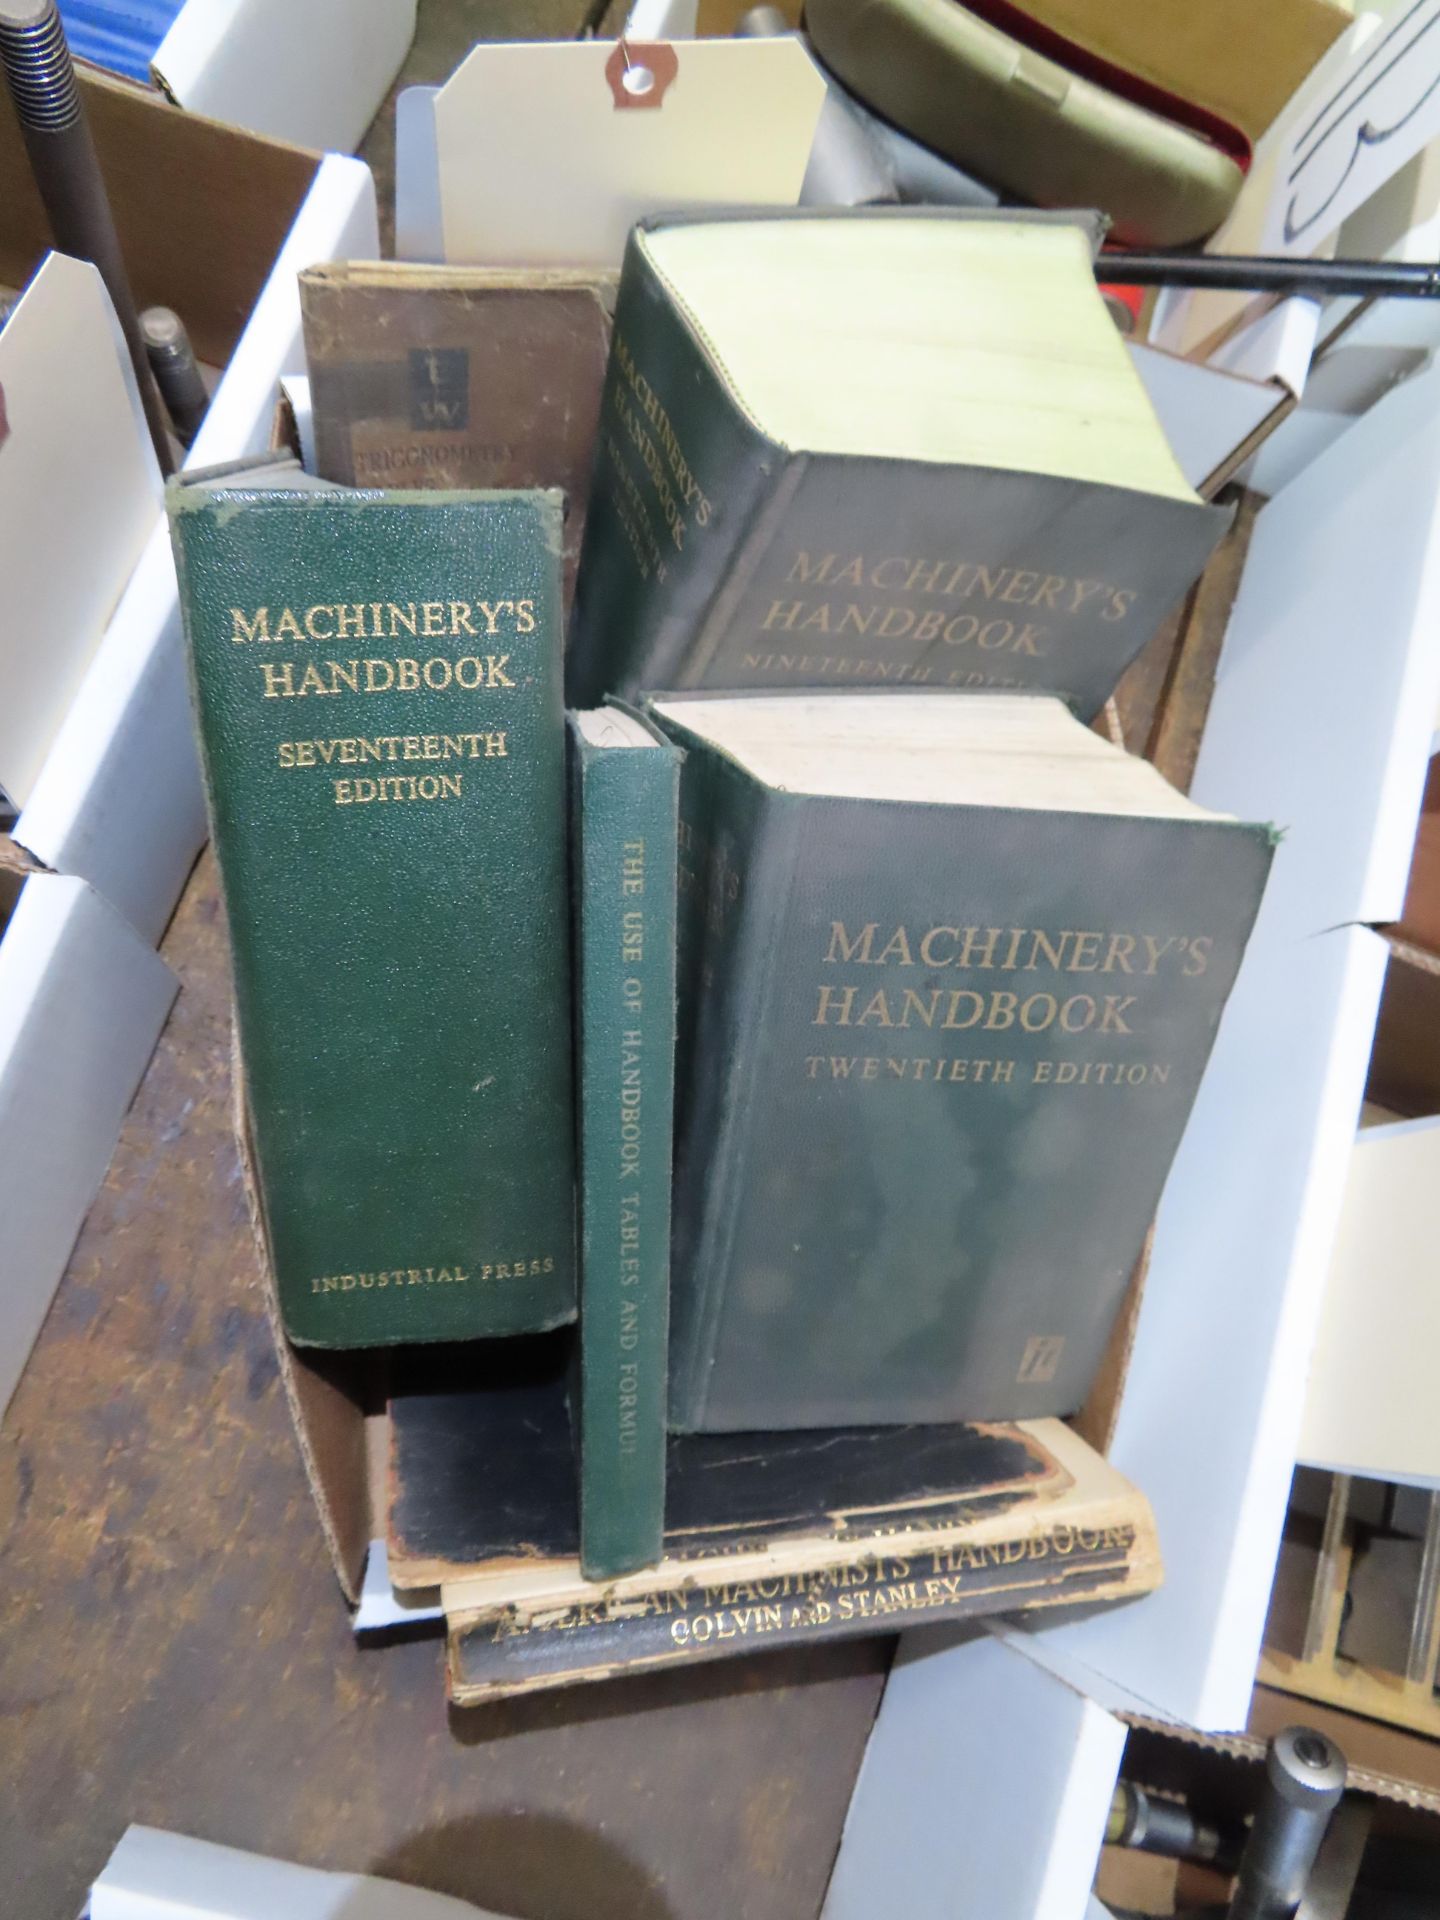 Machinery's Handbook - Various Additions - Image 2 of 3